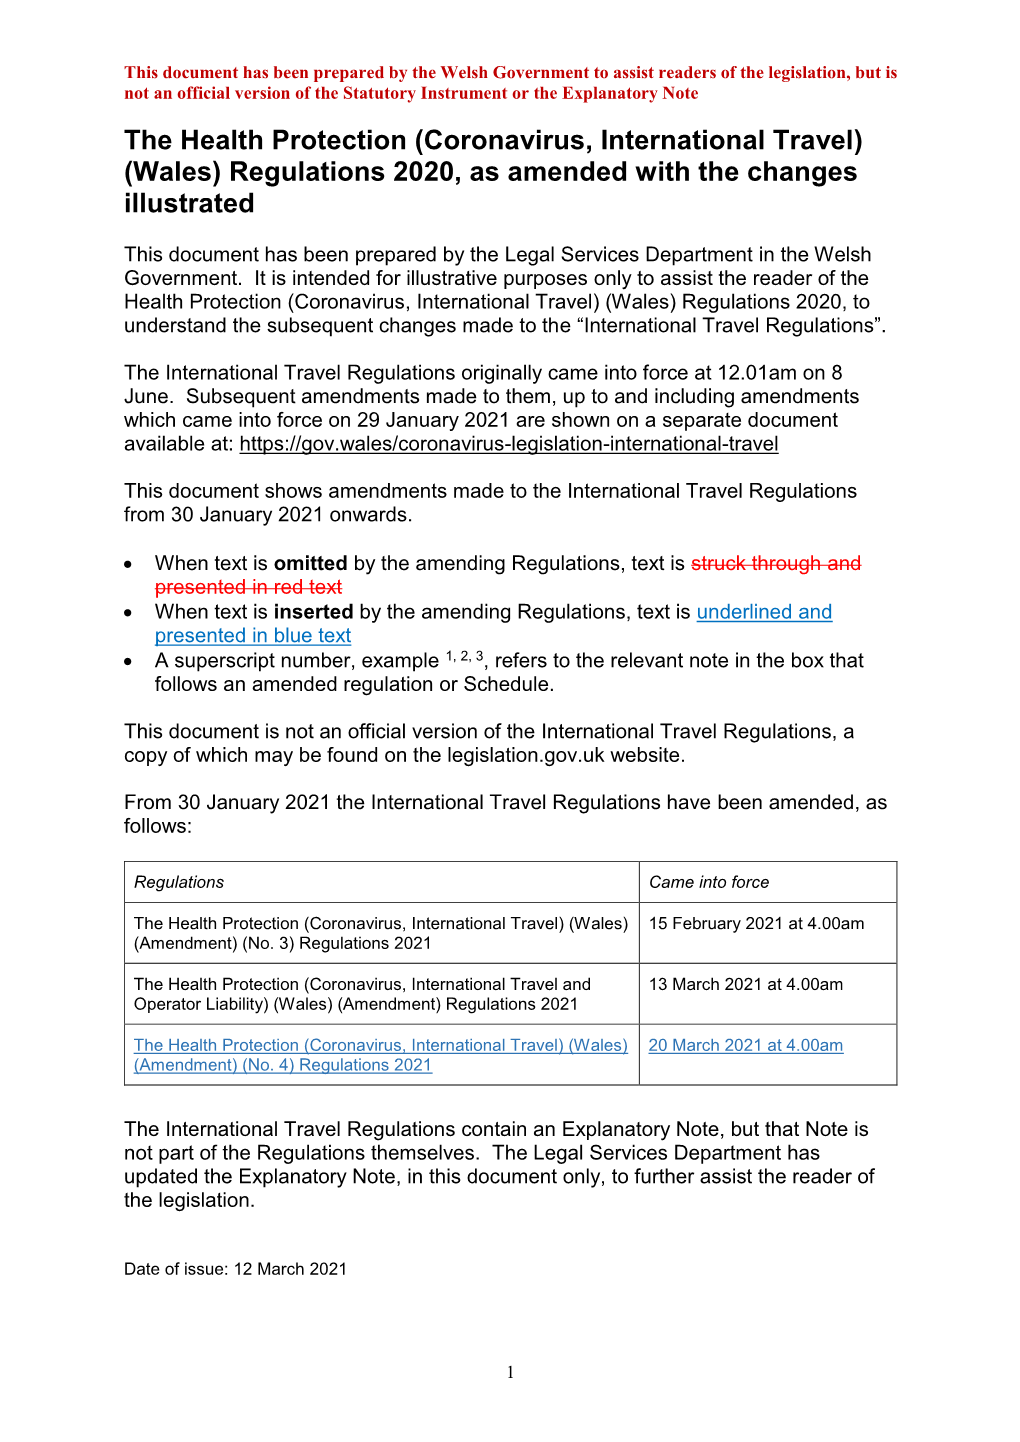 The Health Protection (Coronavirus, International Travel) (Wales) Regulations 2020, As Amended with the Changes Illustrated